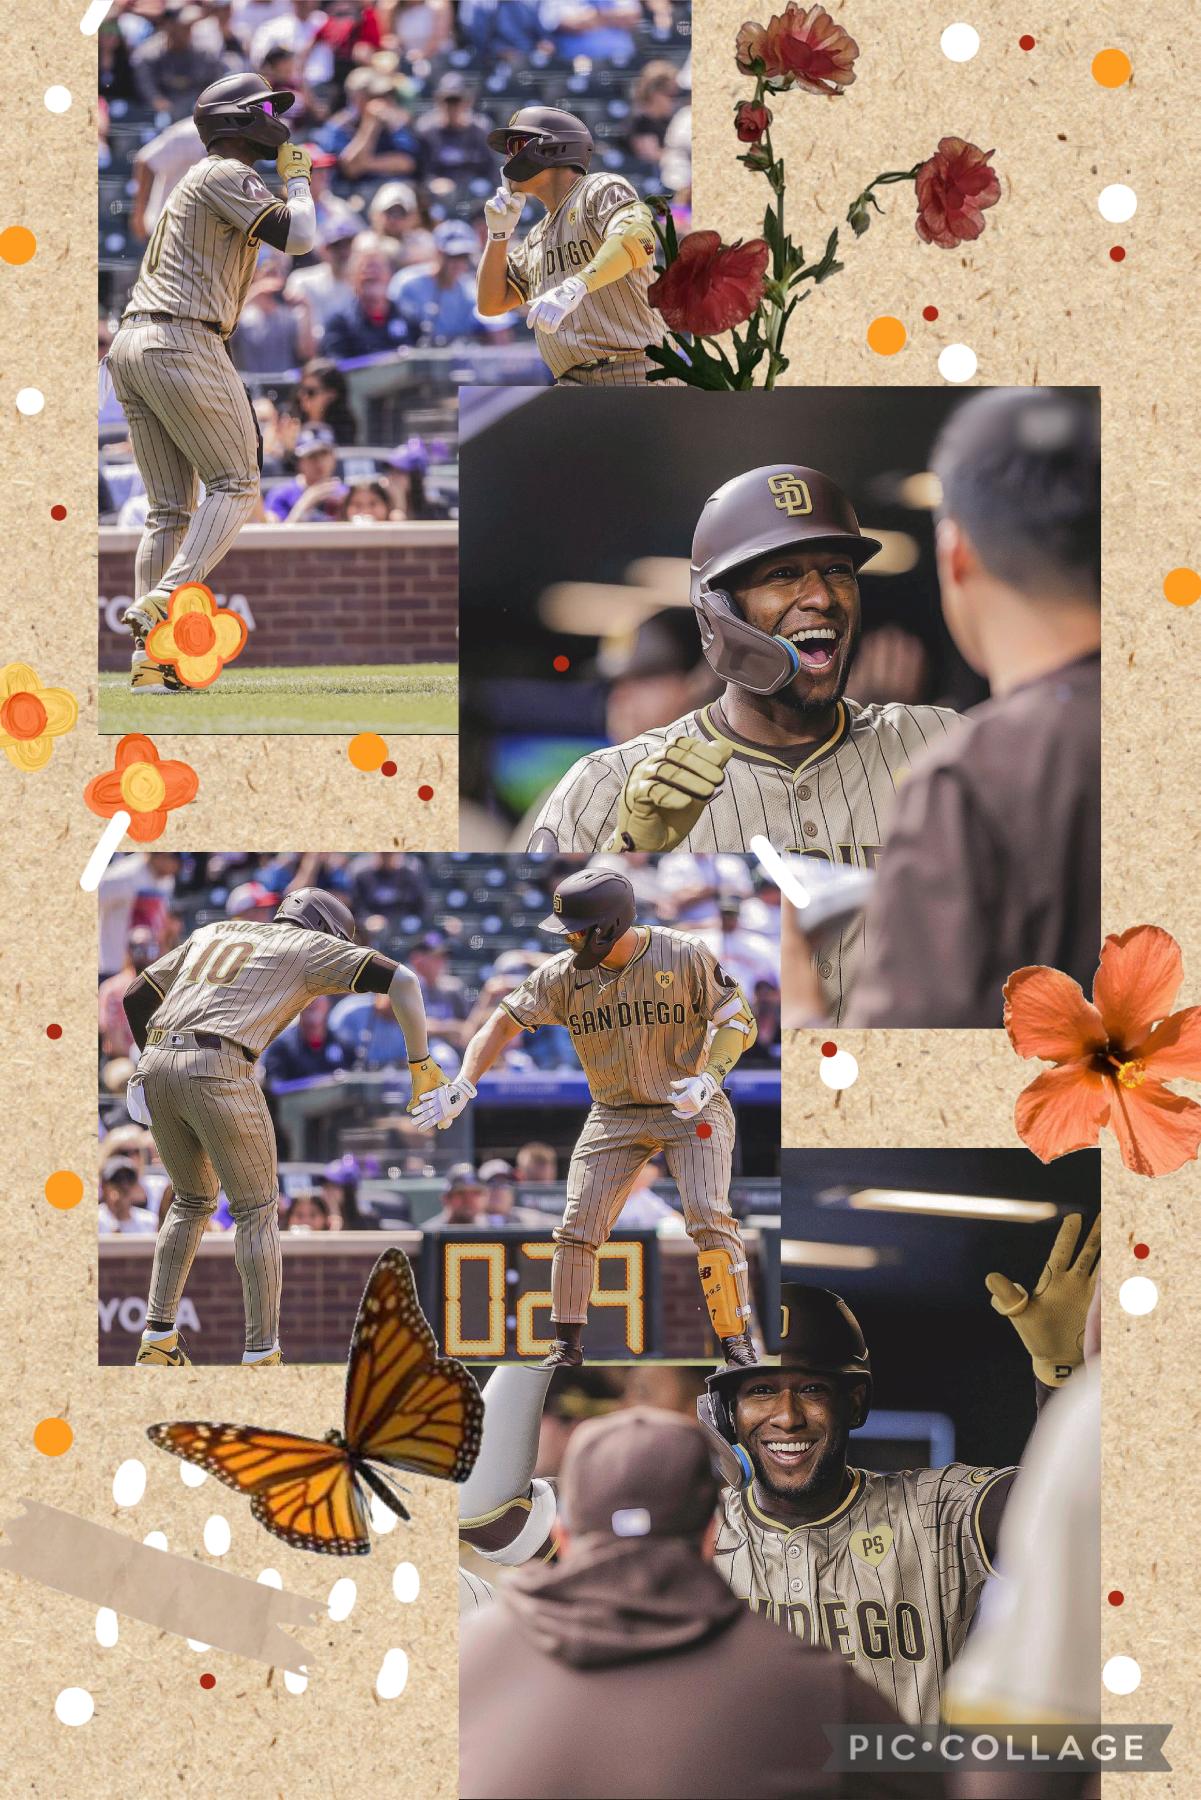 Although we lost, these are some great Profar and Kim pictures, I couldn’t find the Polaroids tho, it’s sad their efforts went to waste (we need better pitchers for support) <3